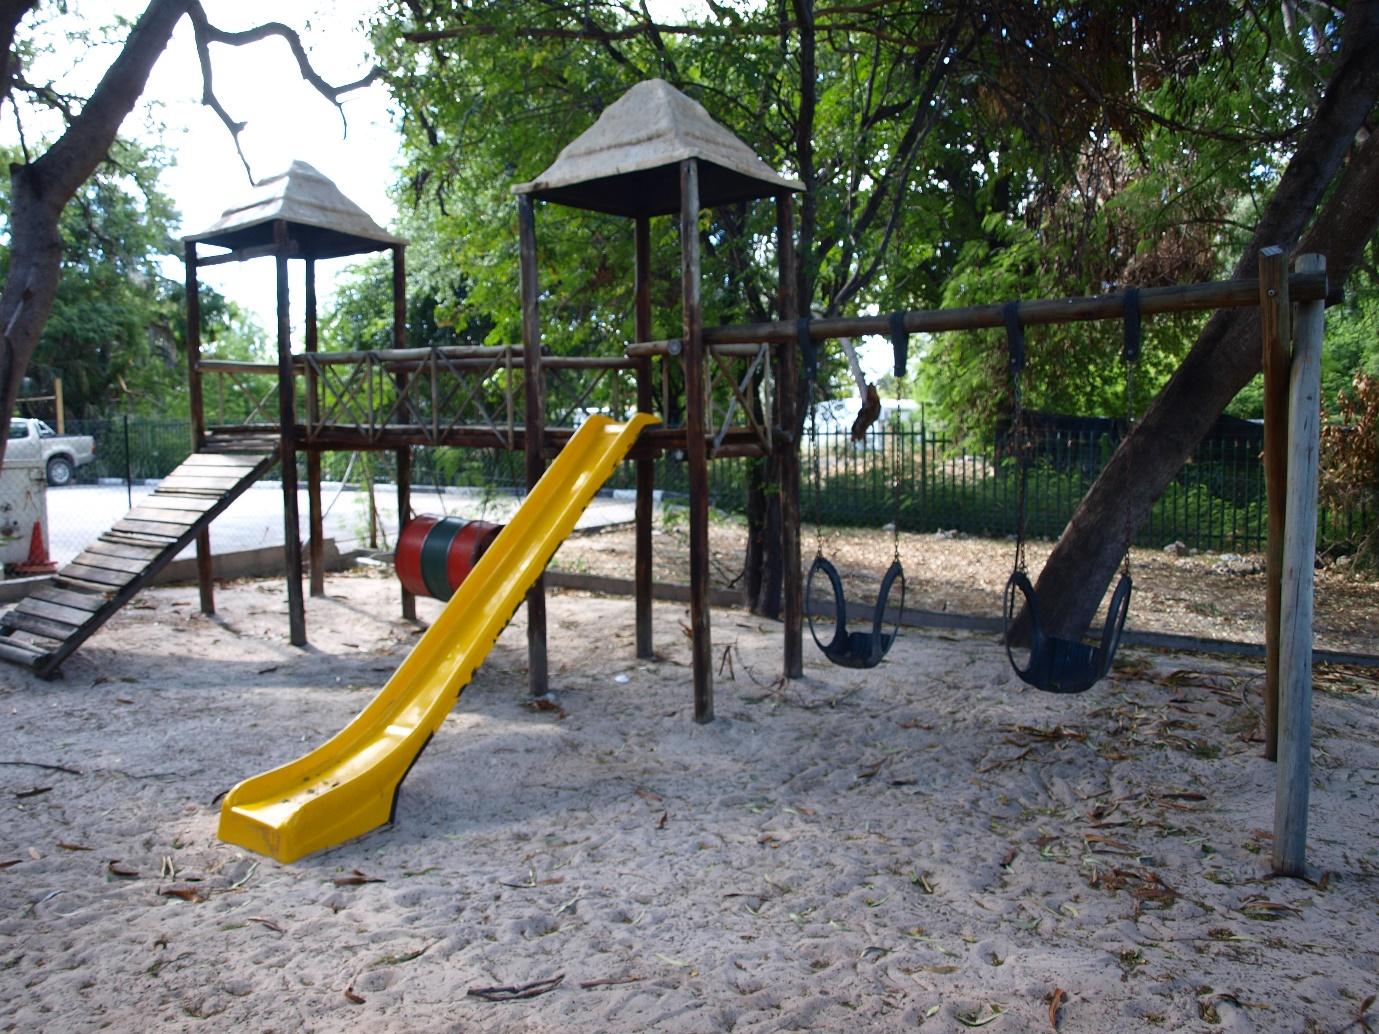 A picture containing ground, tree, outdoor, playground

Description automatically generated